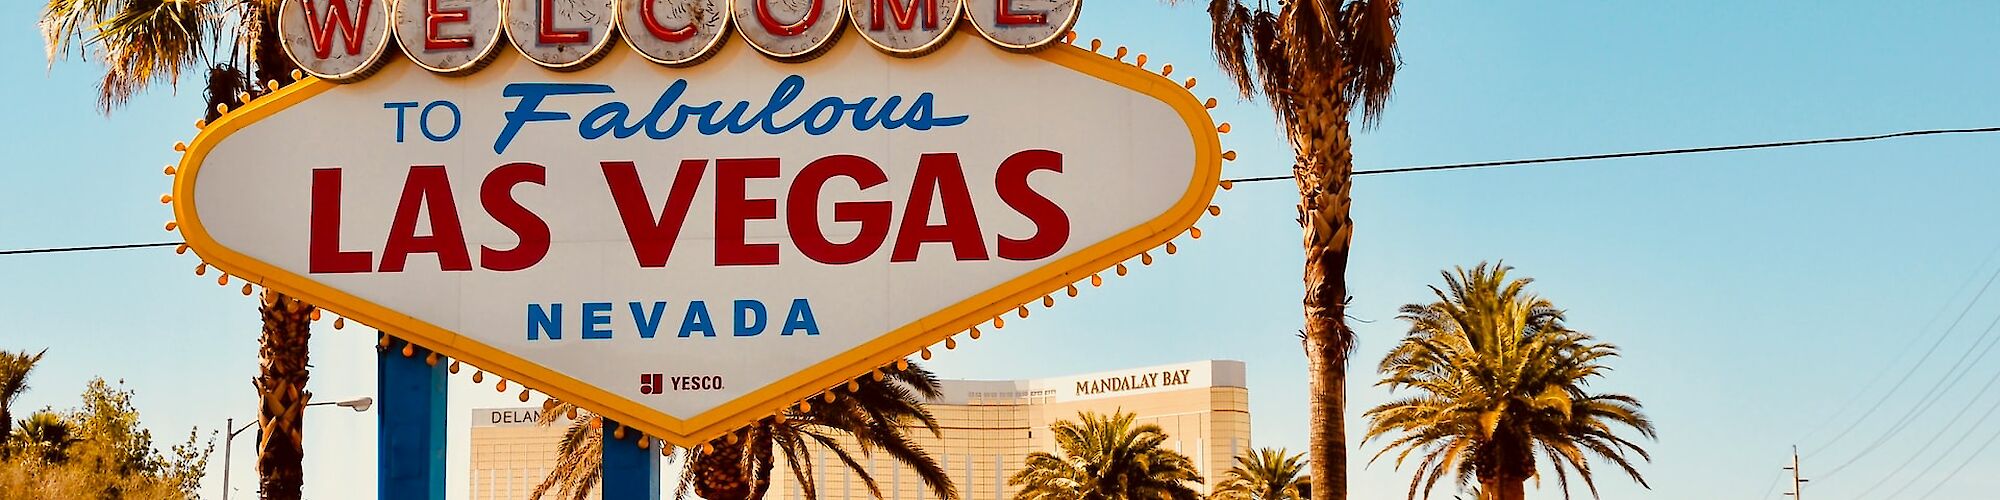 The image shows the iconic "Welcome to Fabulous Las Vegas Nevada" sign surrounded by palm trees under a clear blue sky, with a view of the city.